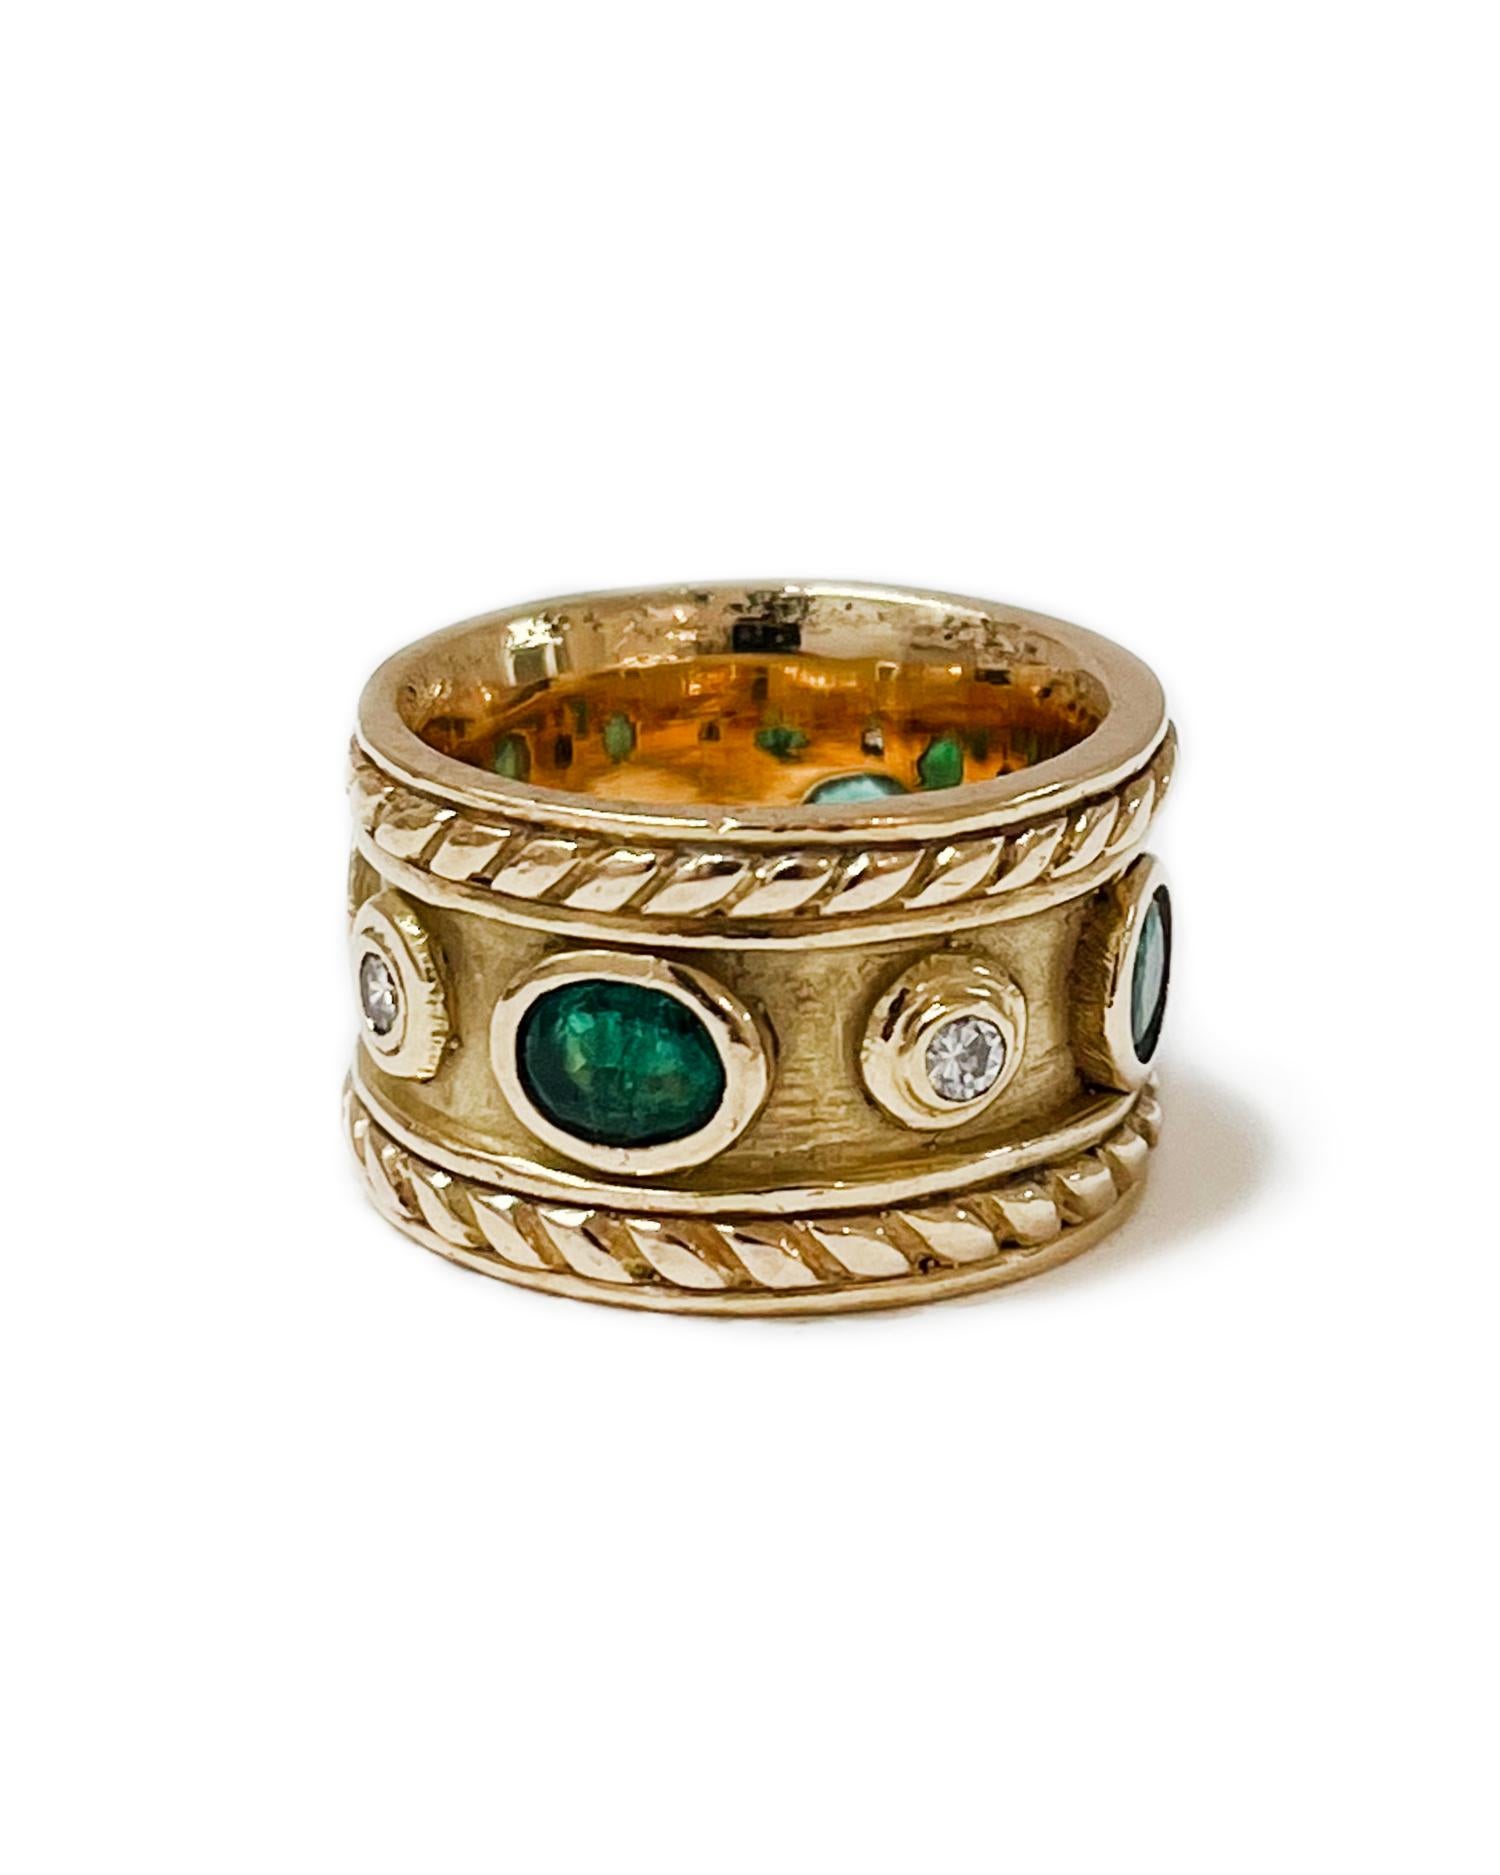 Oval Cut Royalty Band Ring in Emerald, Diamond and 14k Yellow Gold